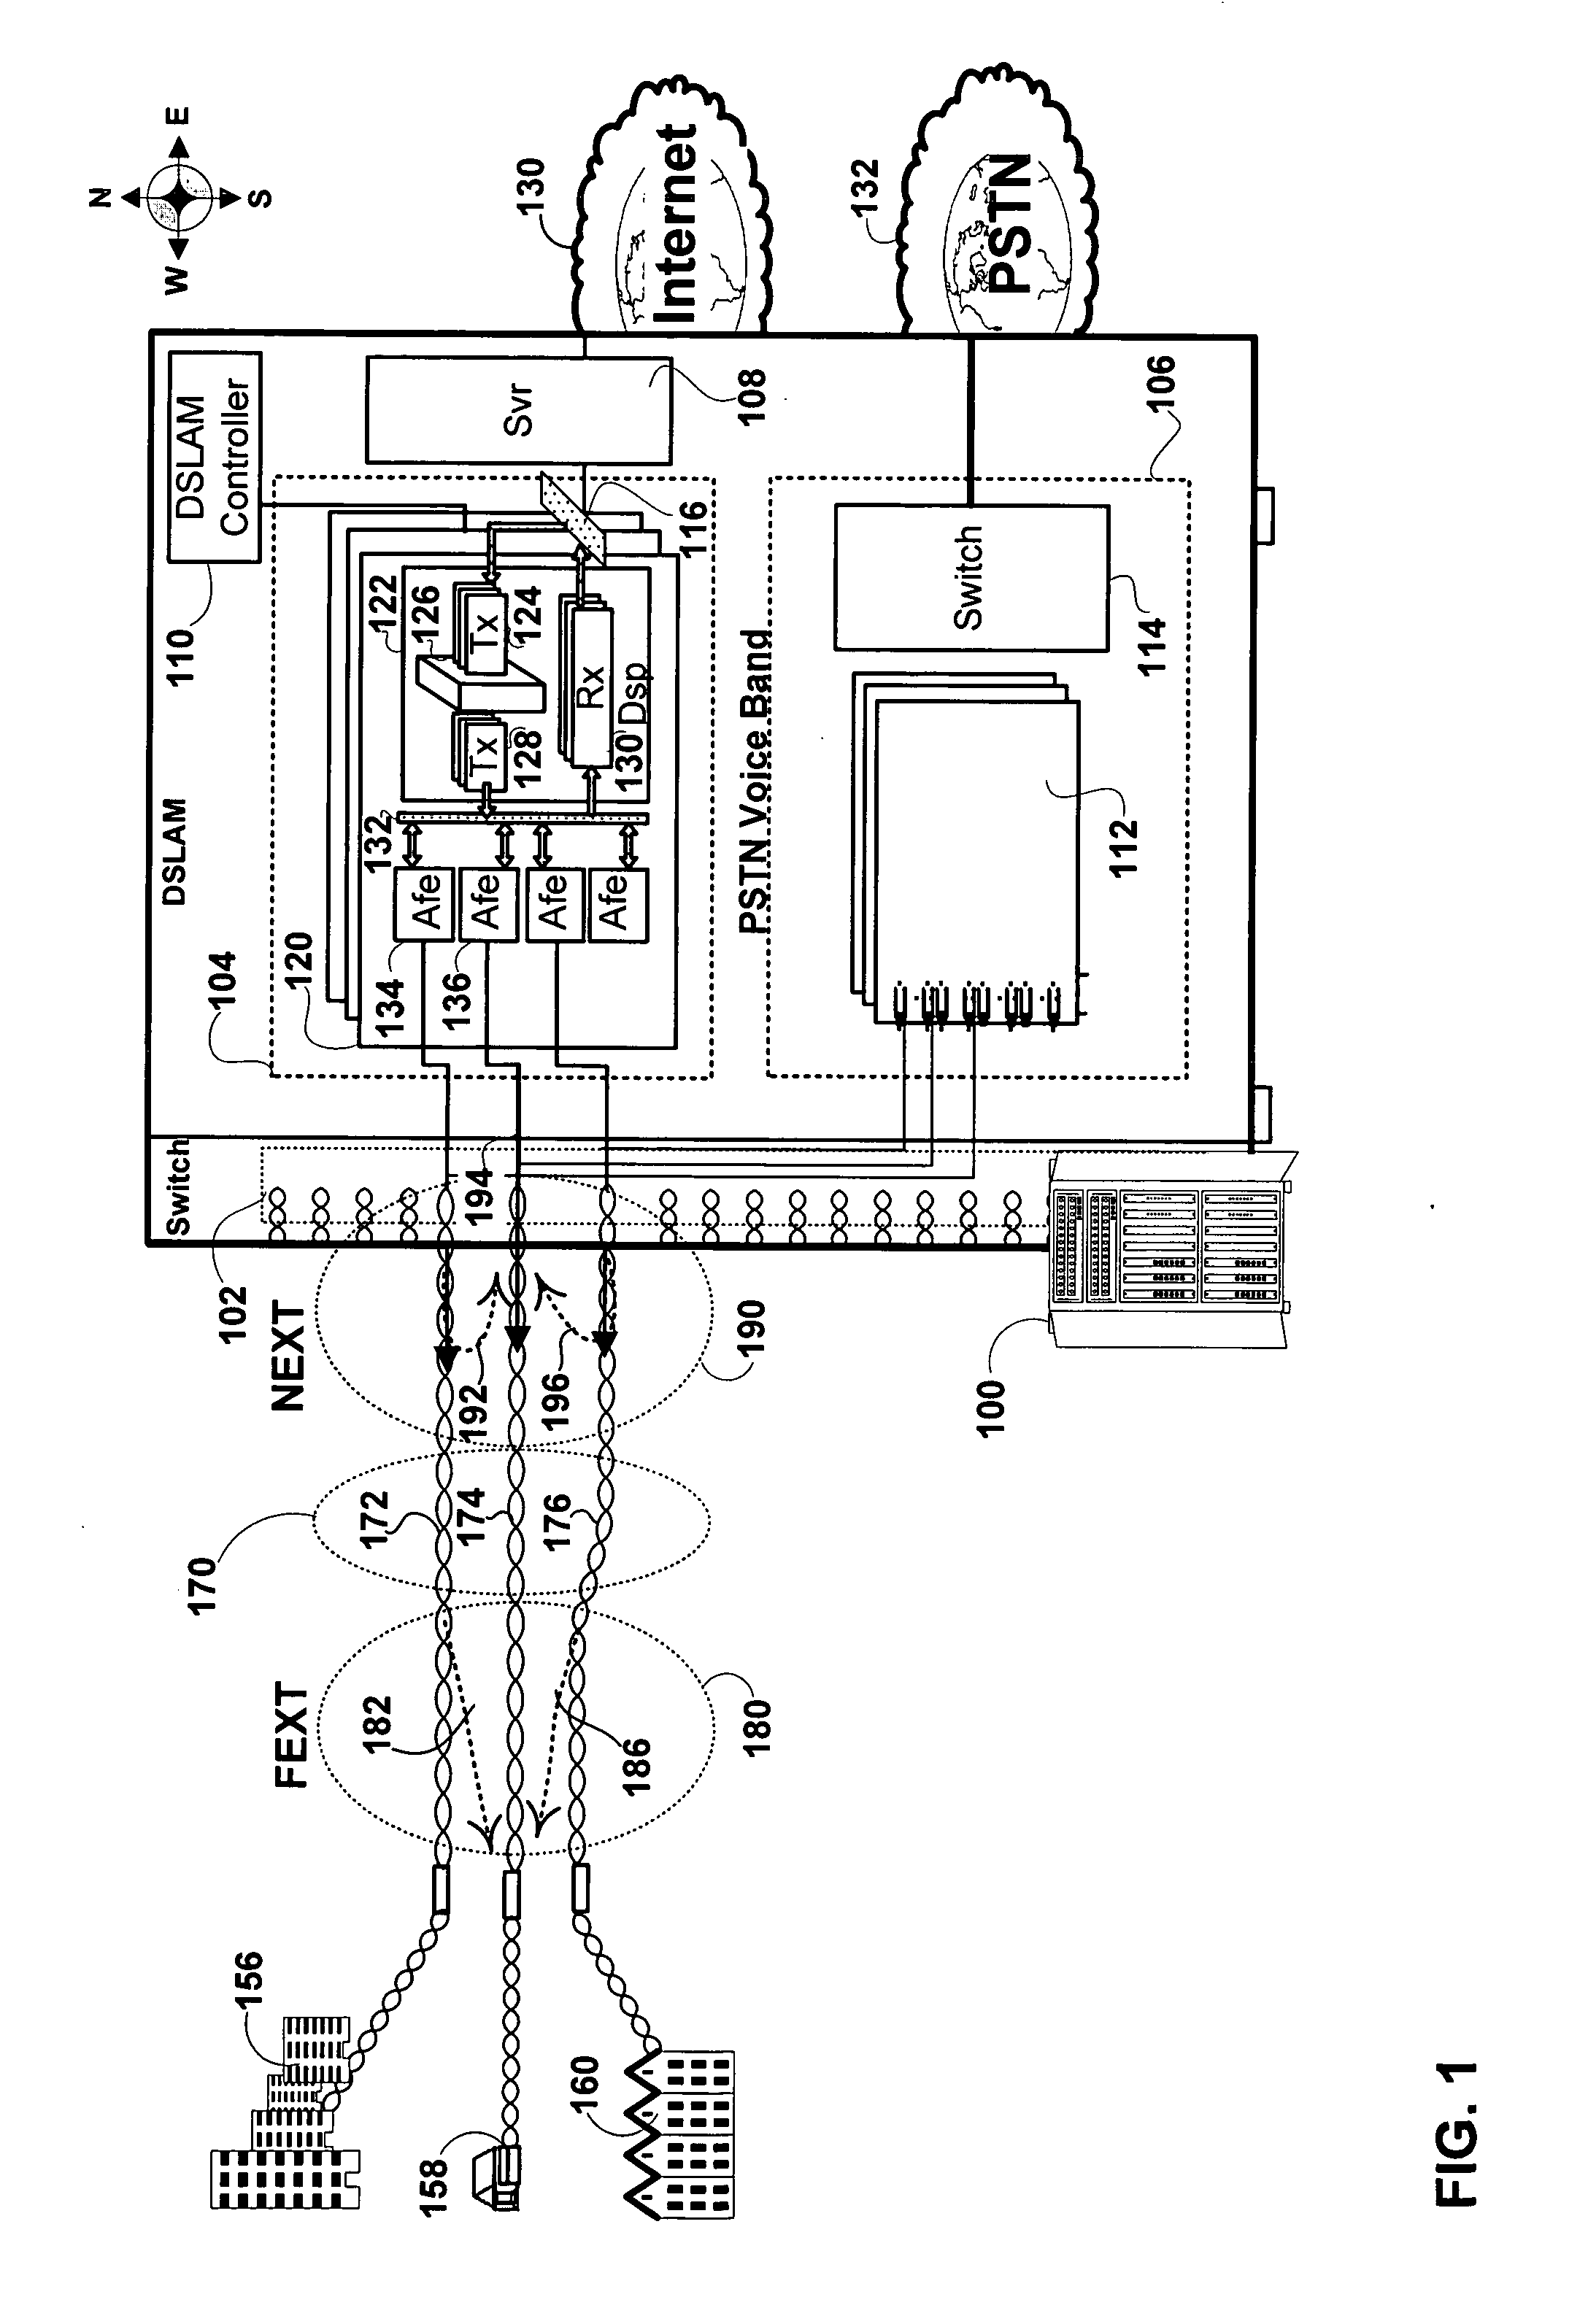 Method and apparatus for DMT crosstalk cancellation